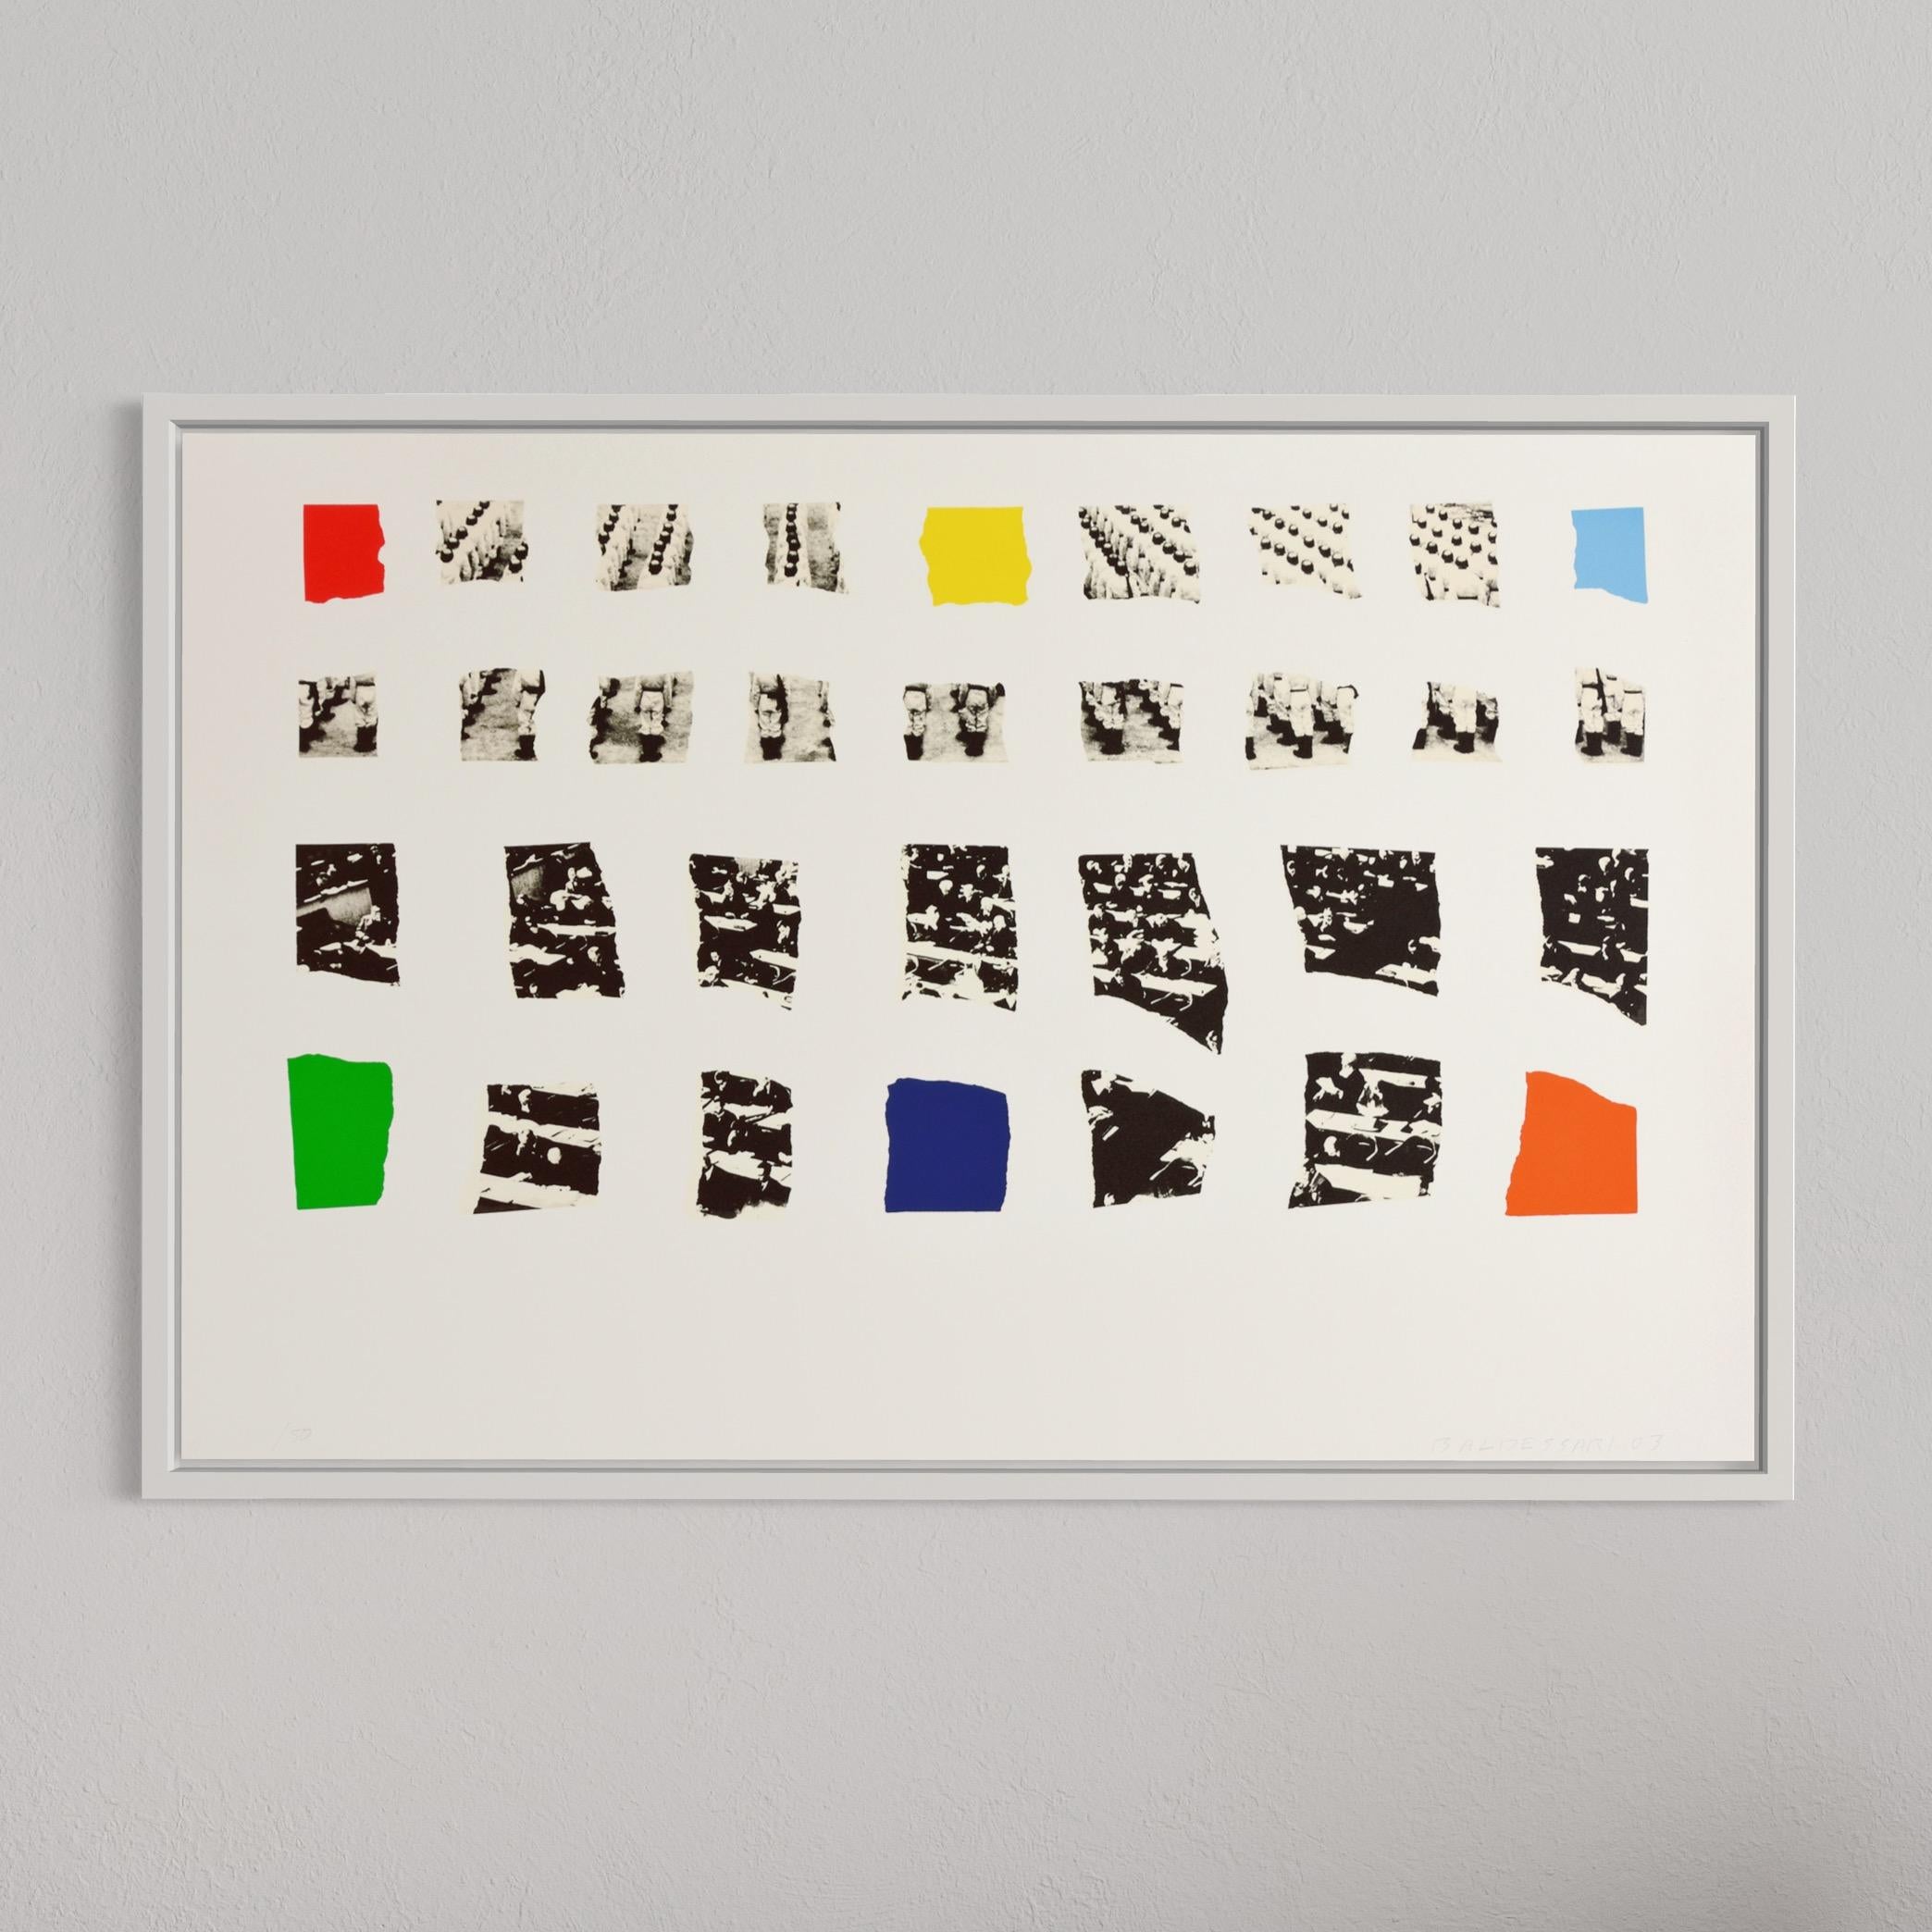 John Baldessari, Two Assemblages (with R, O, Y, G, B, V Opaque) - Signed Print